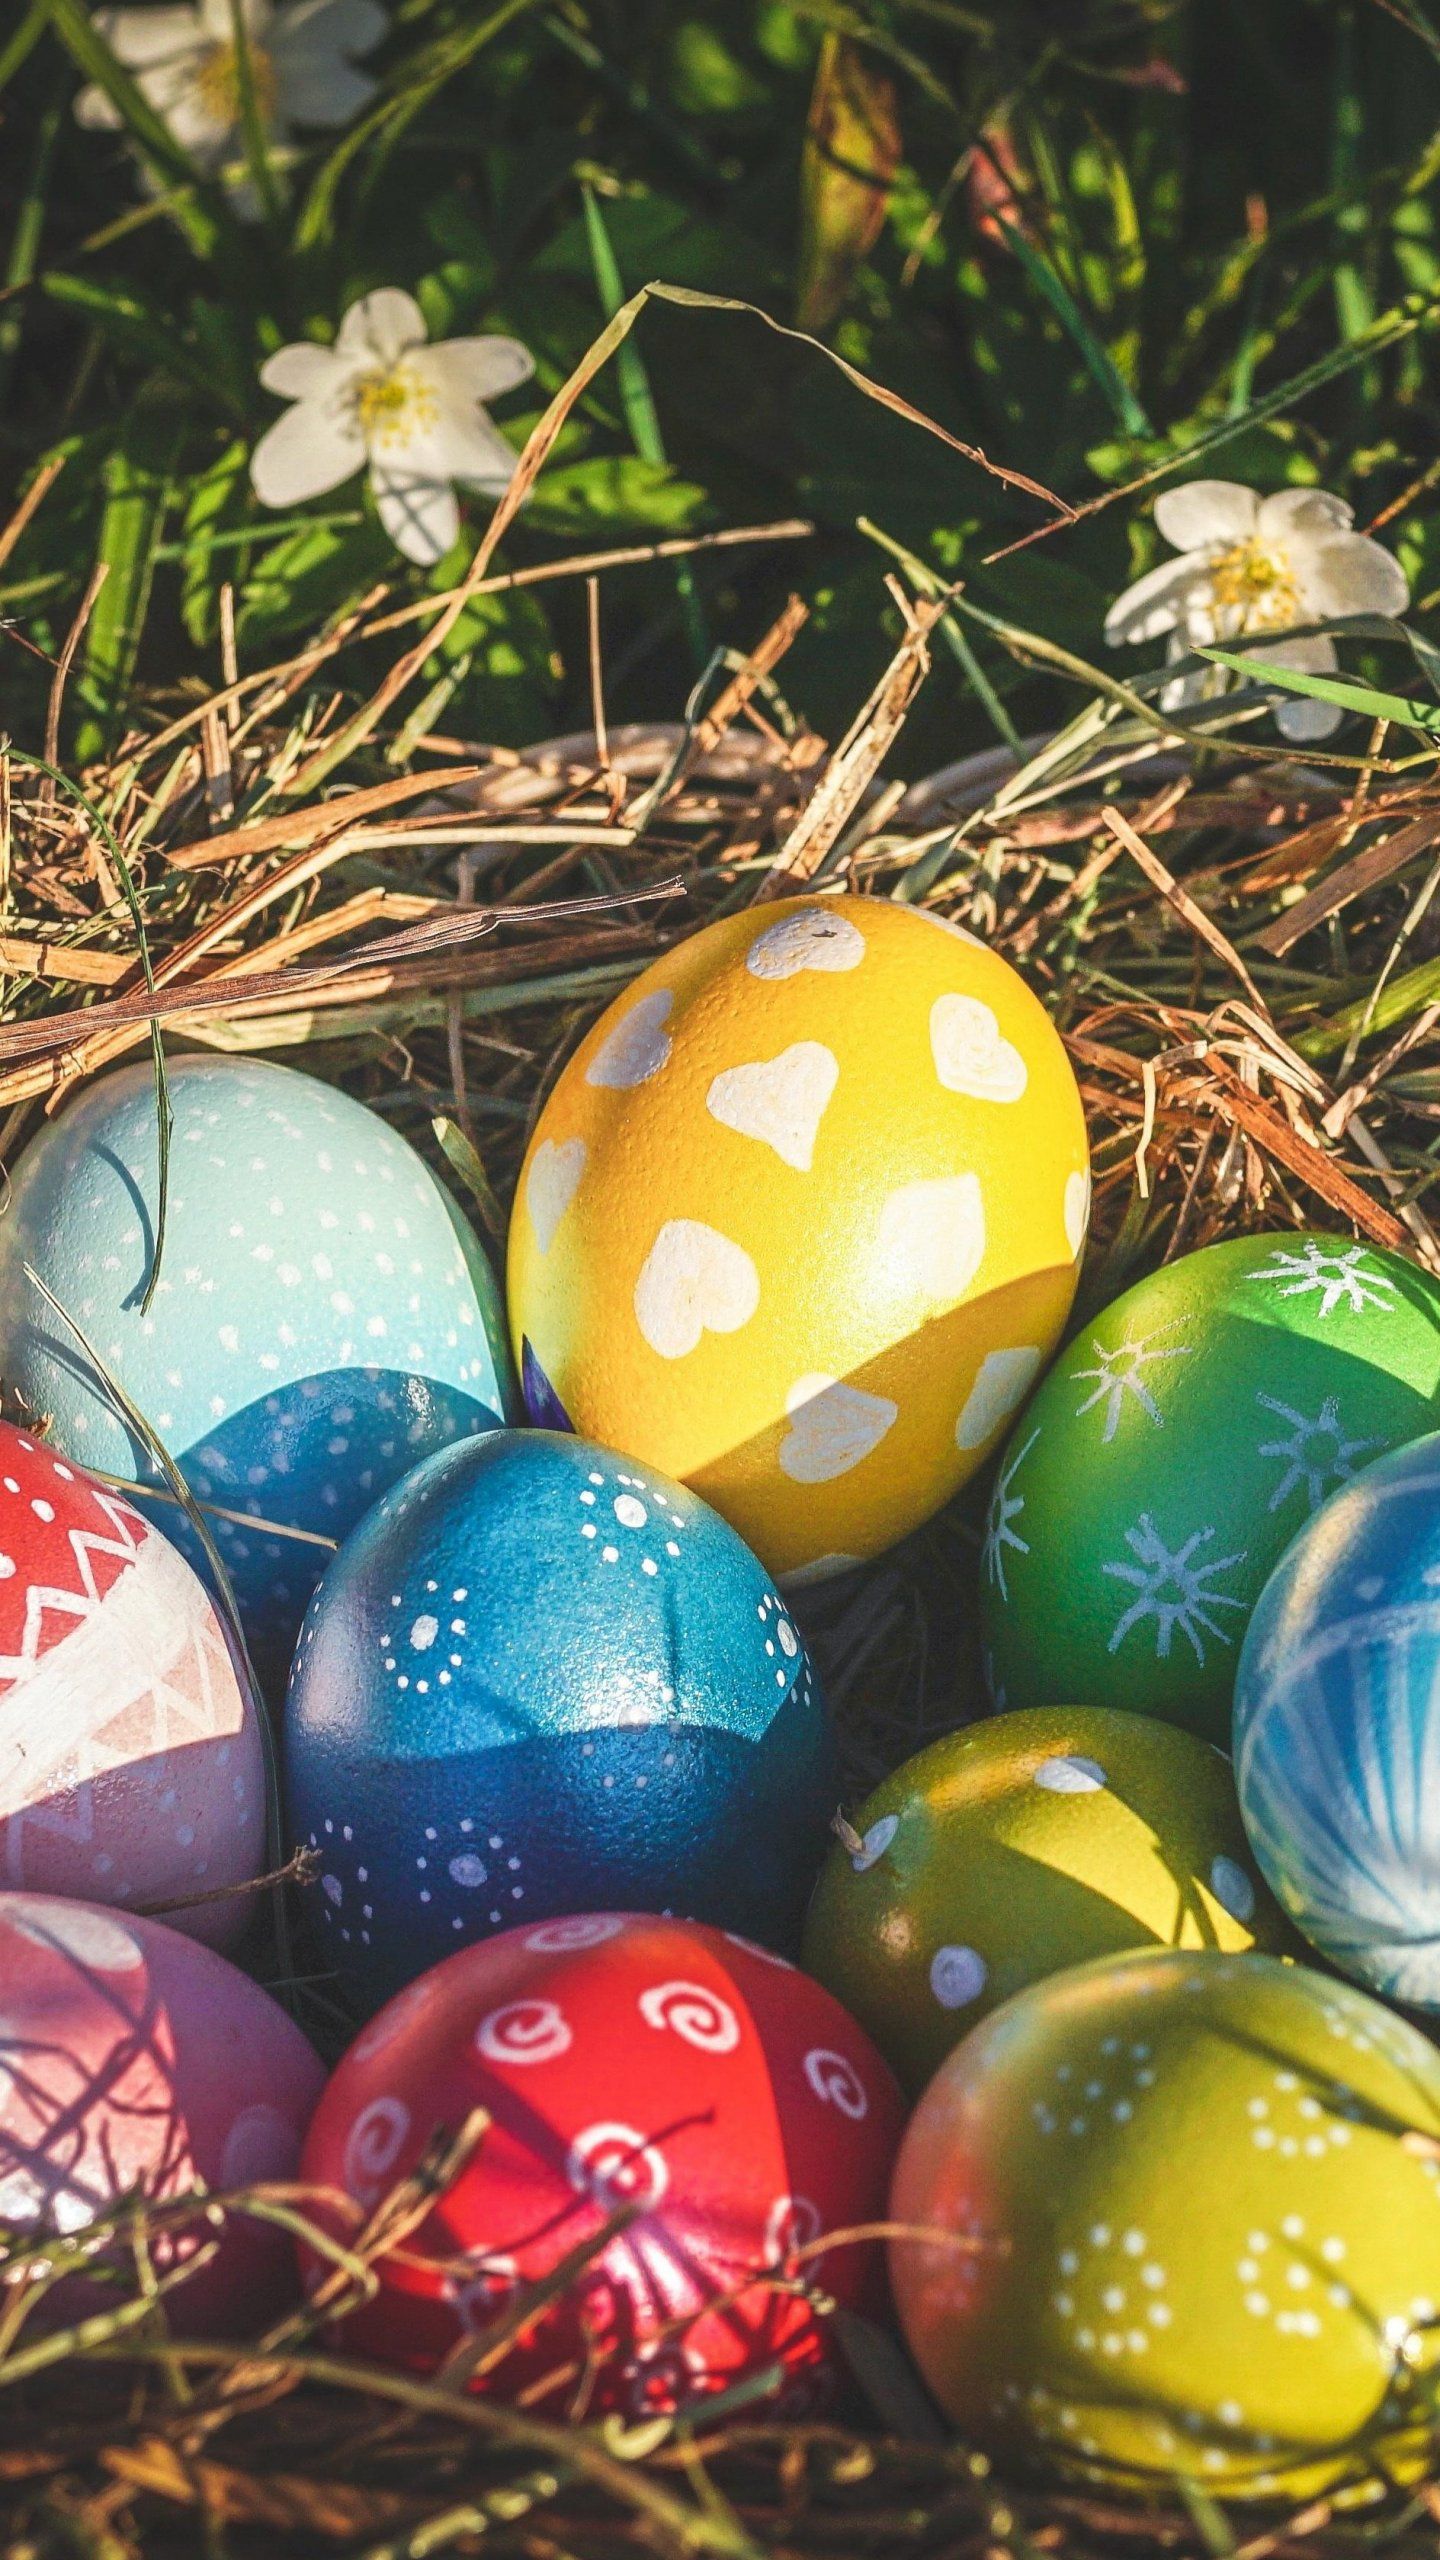 Cute Easter Eggs Wallpaper, Android & Desktop Background